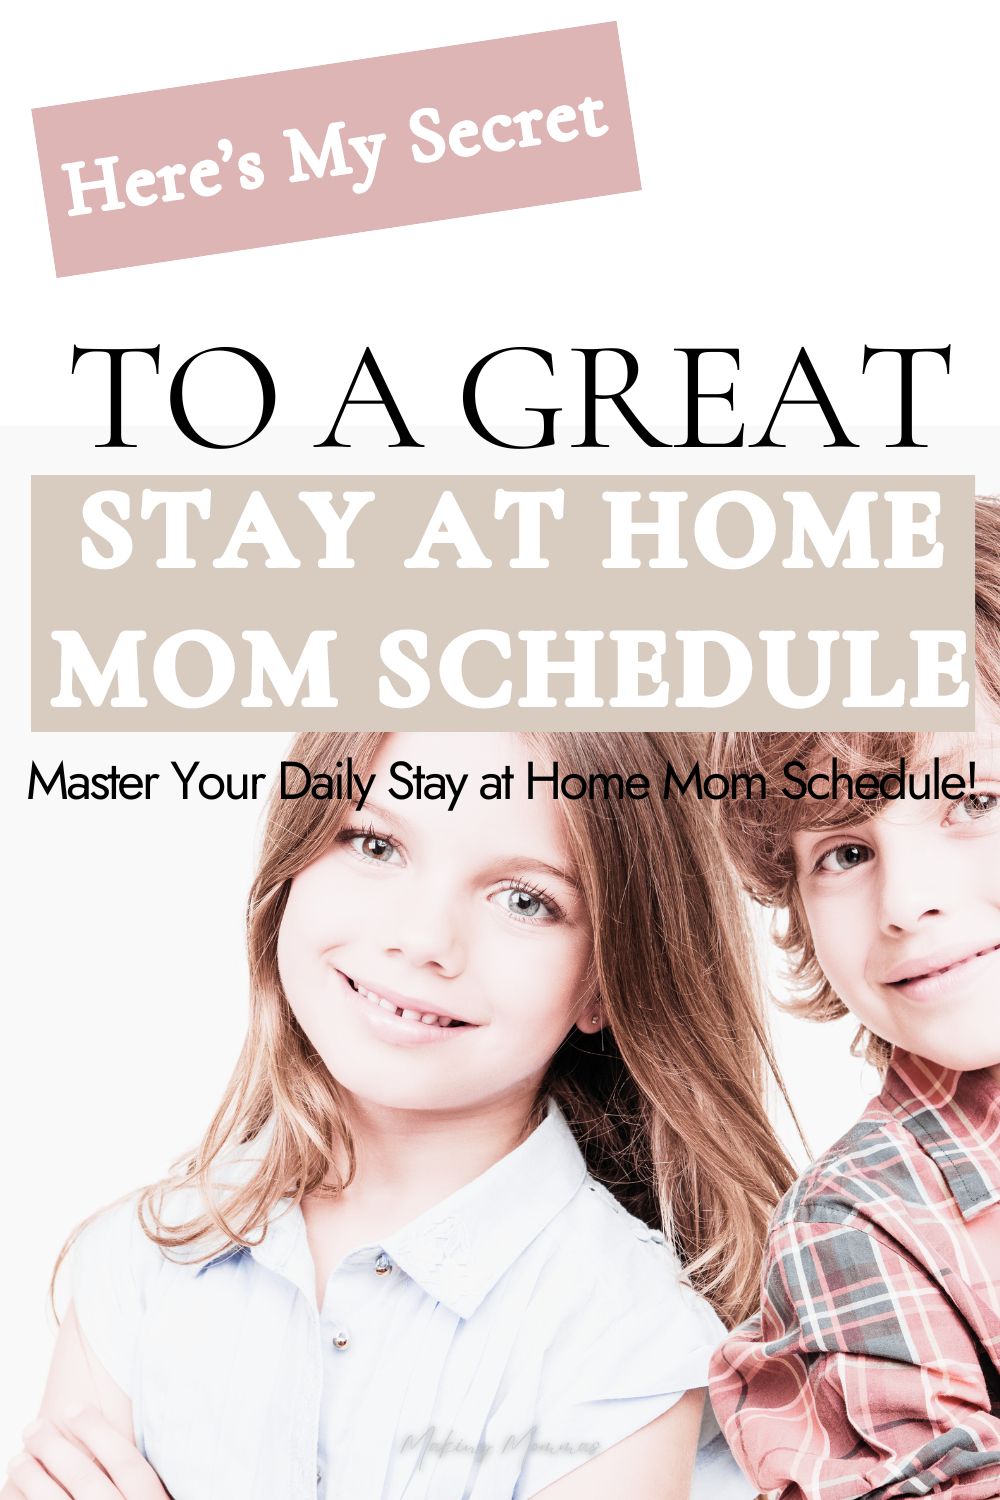 Pin image that reads, "Here's my secret to a great stay at home mom schedule - master your daily stay at home mom schedule!" with an image of a boy and a girl.